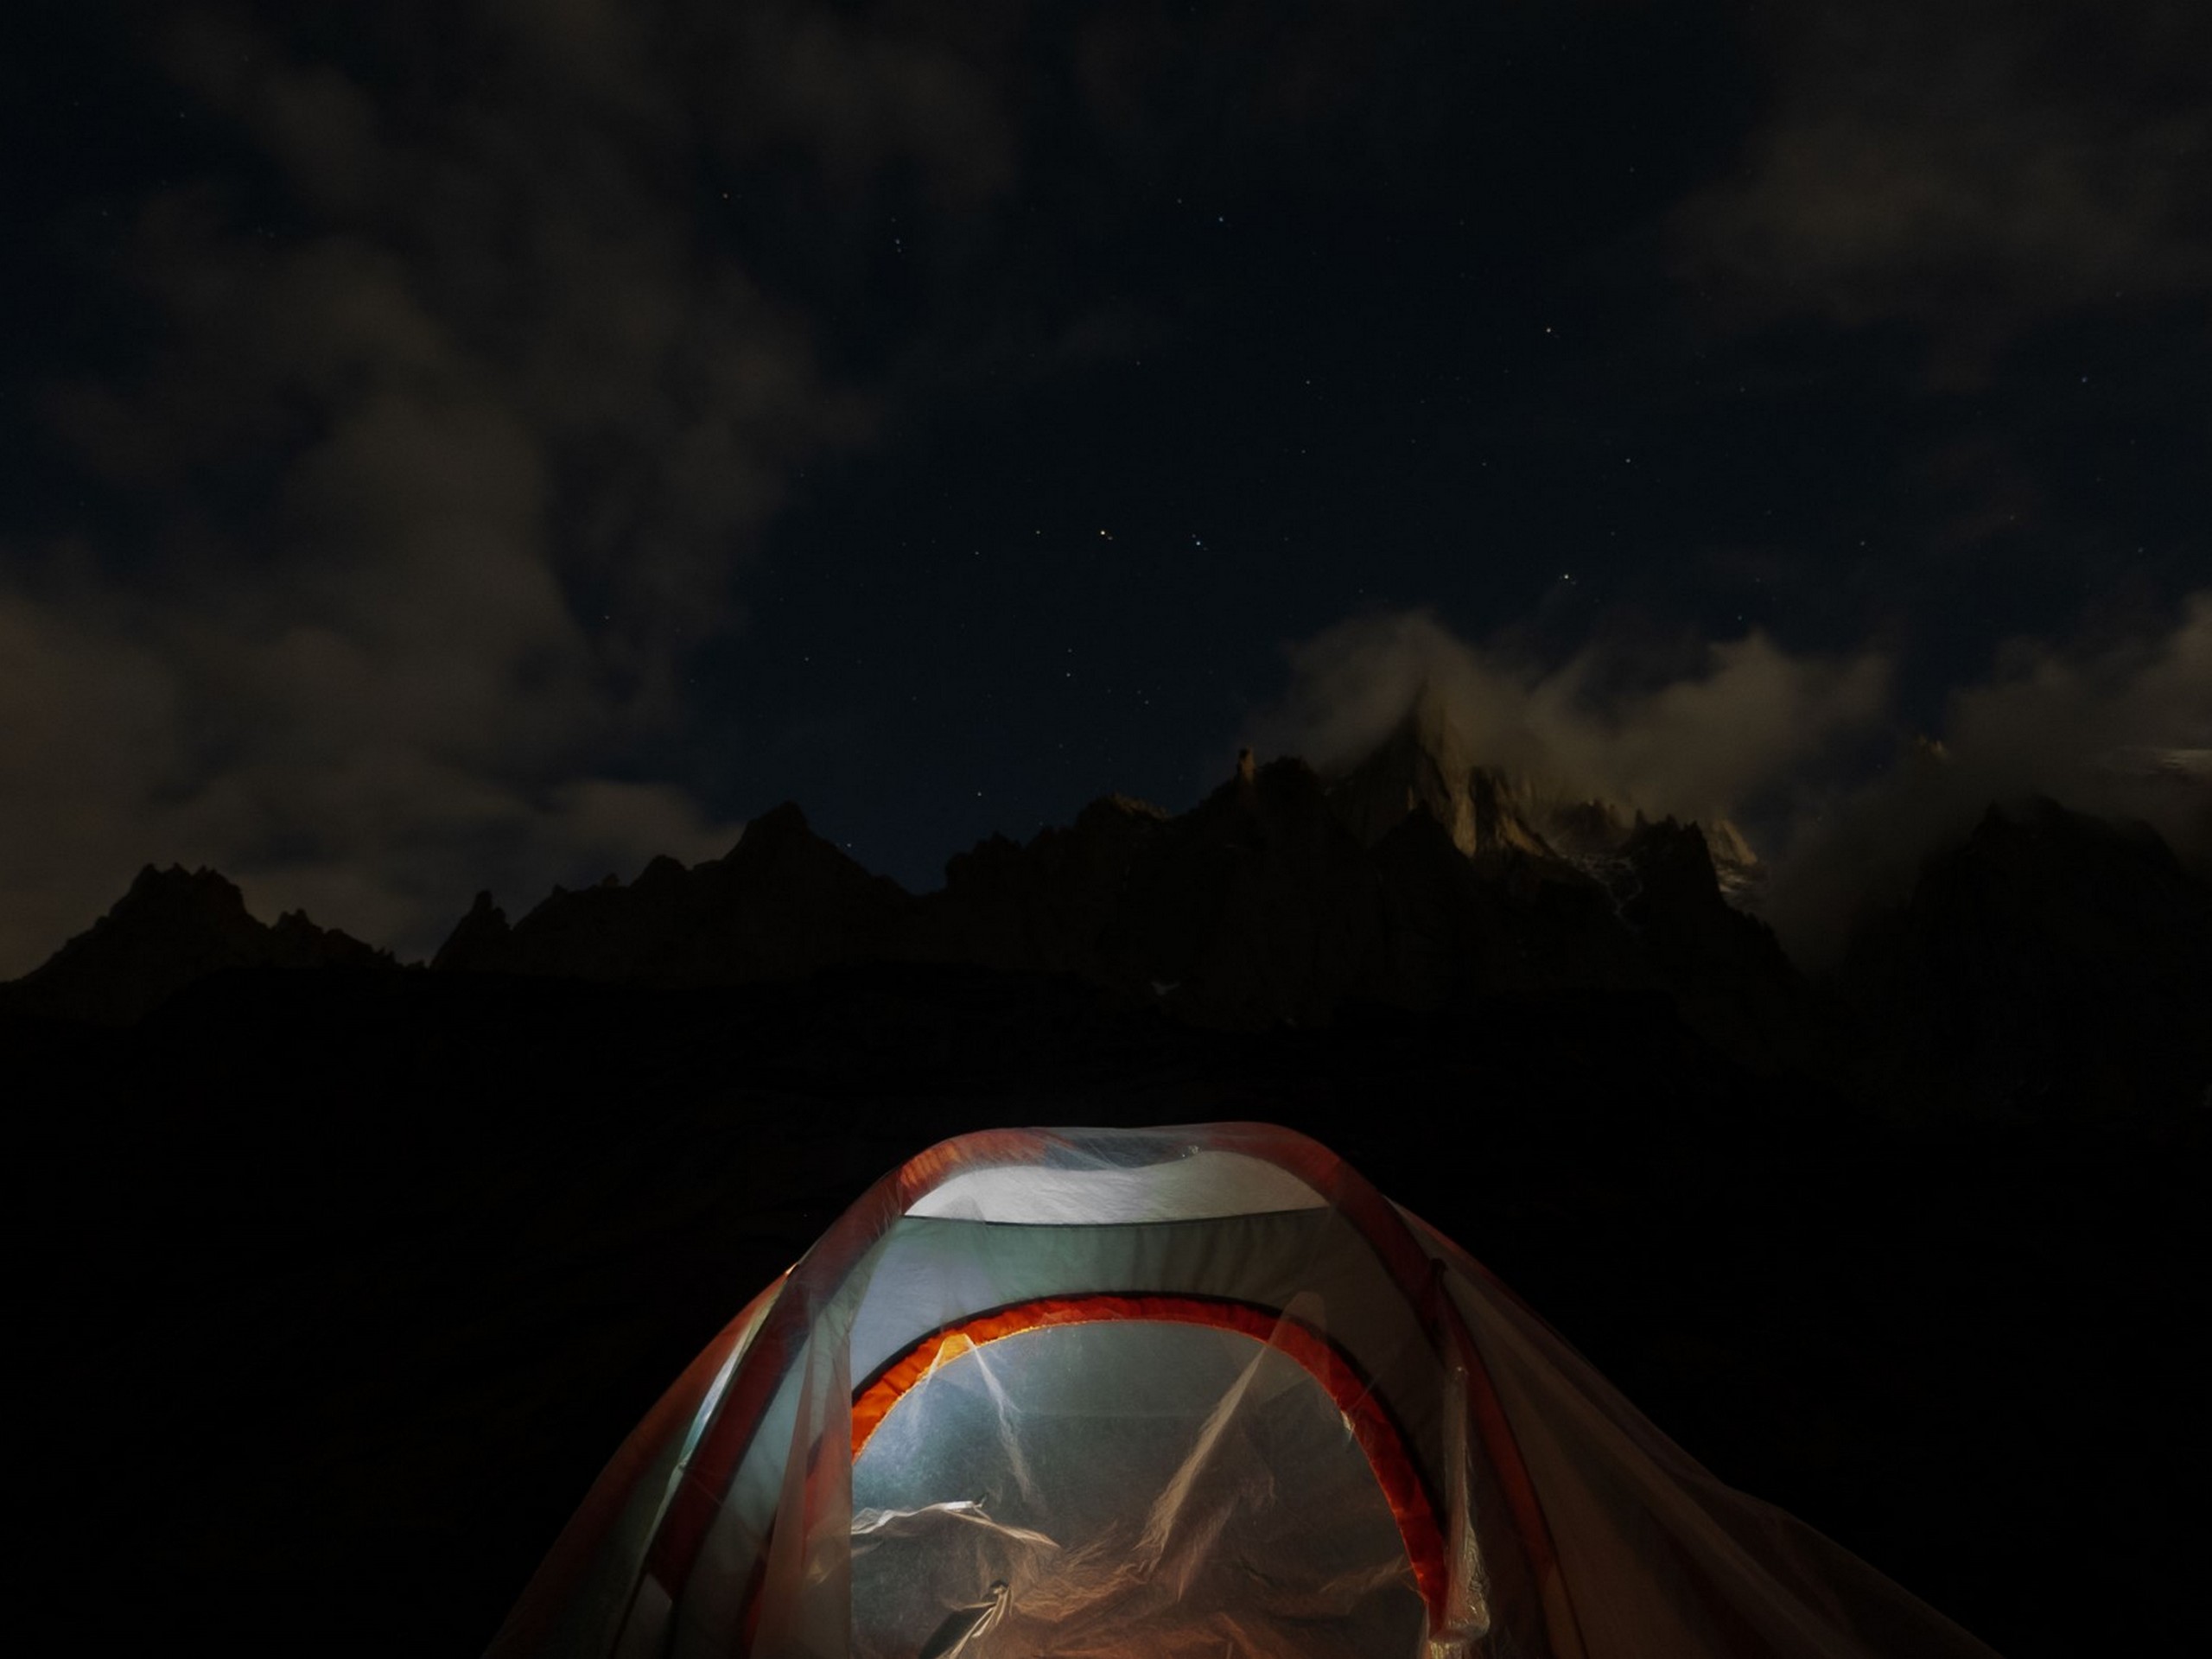 Camp during the night